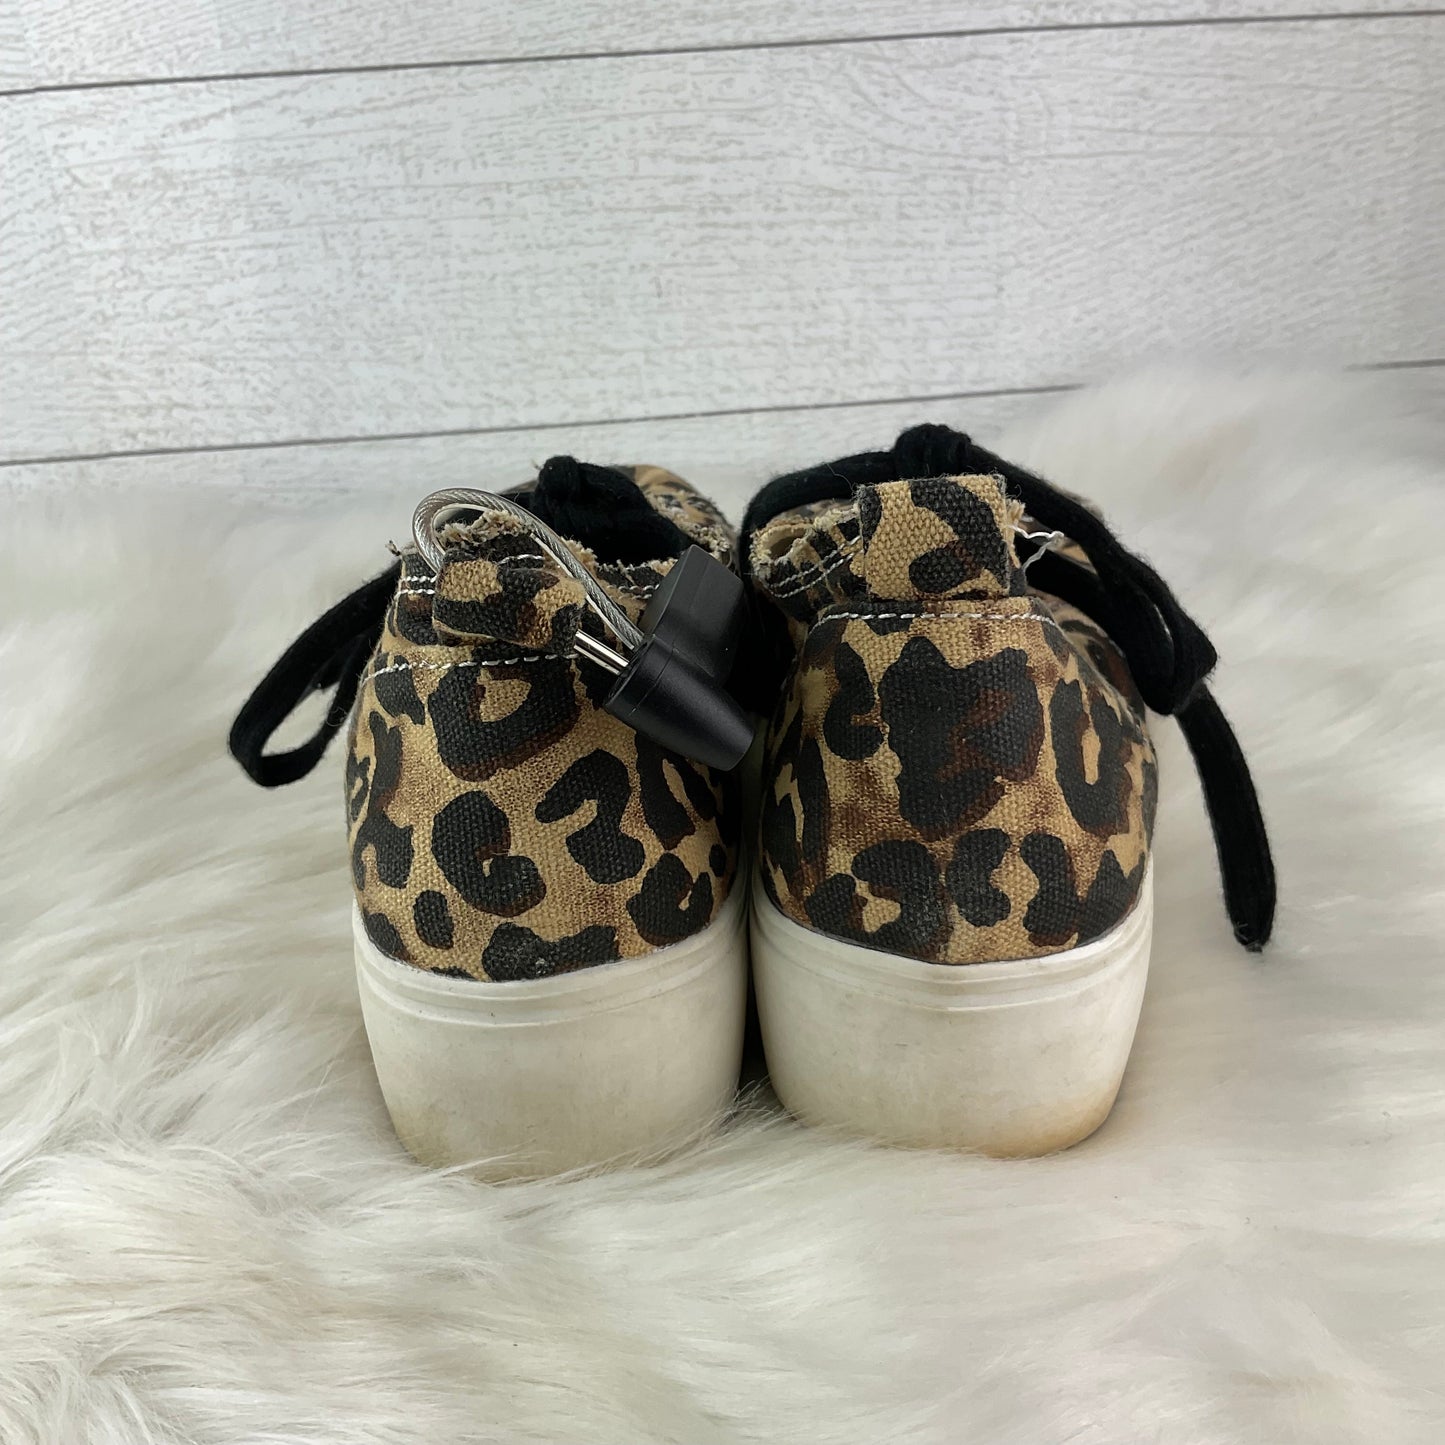 Animal Print Shoes Sneakers Jelly Pop, Size 9